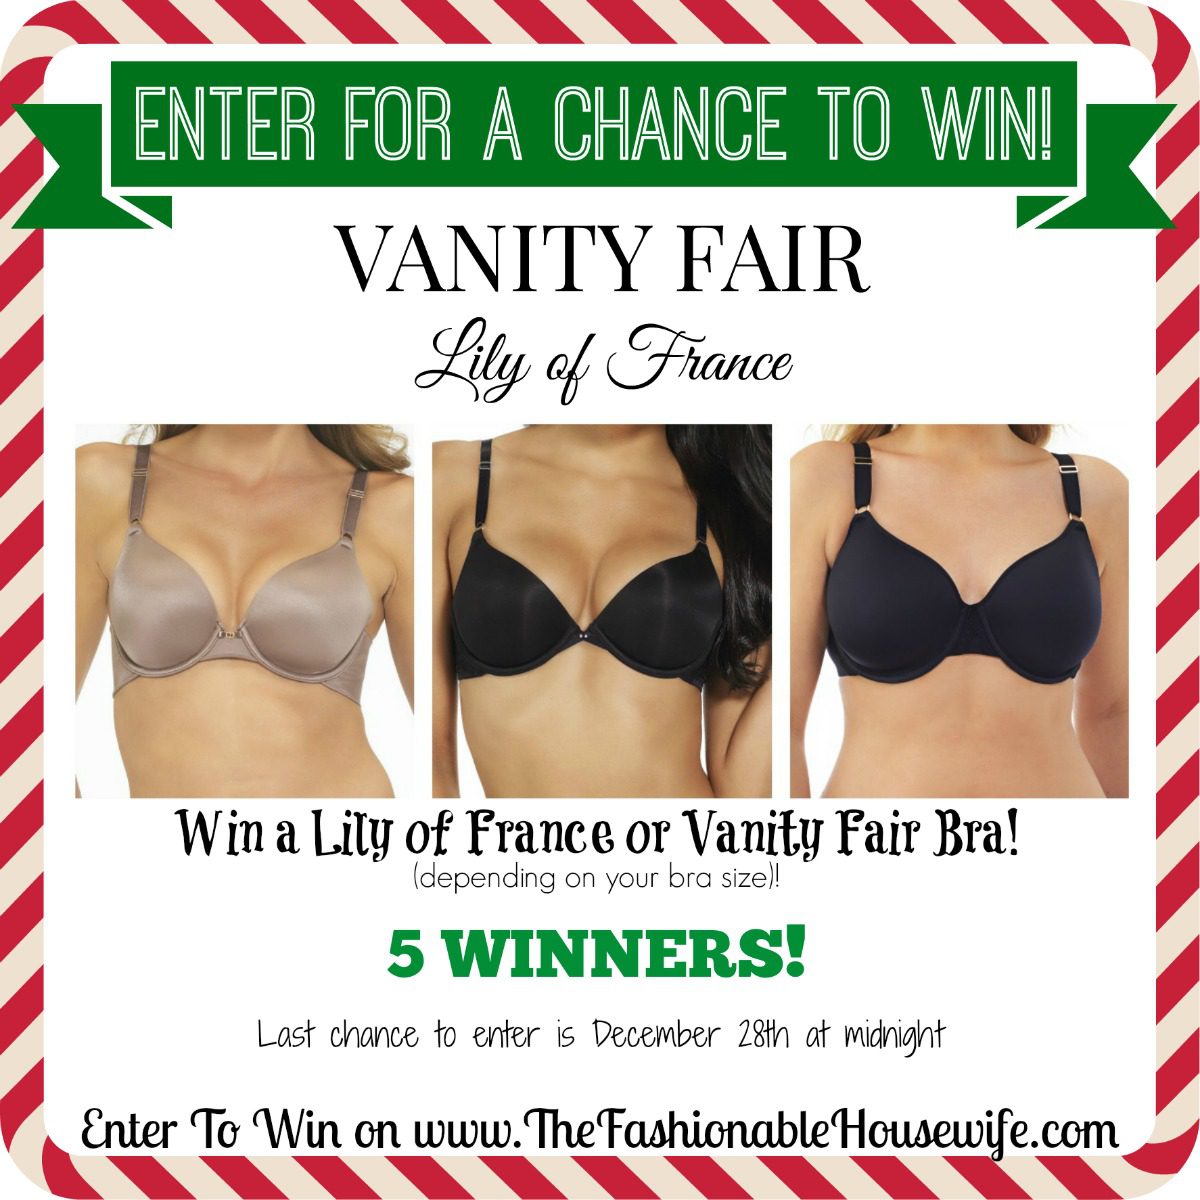 Enter for a chance to win a Vanity Fair Bra